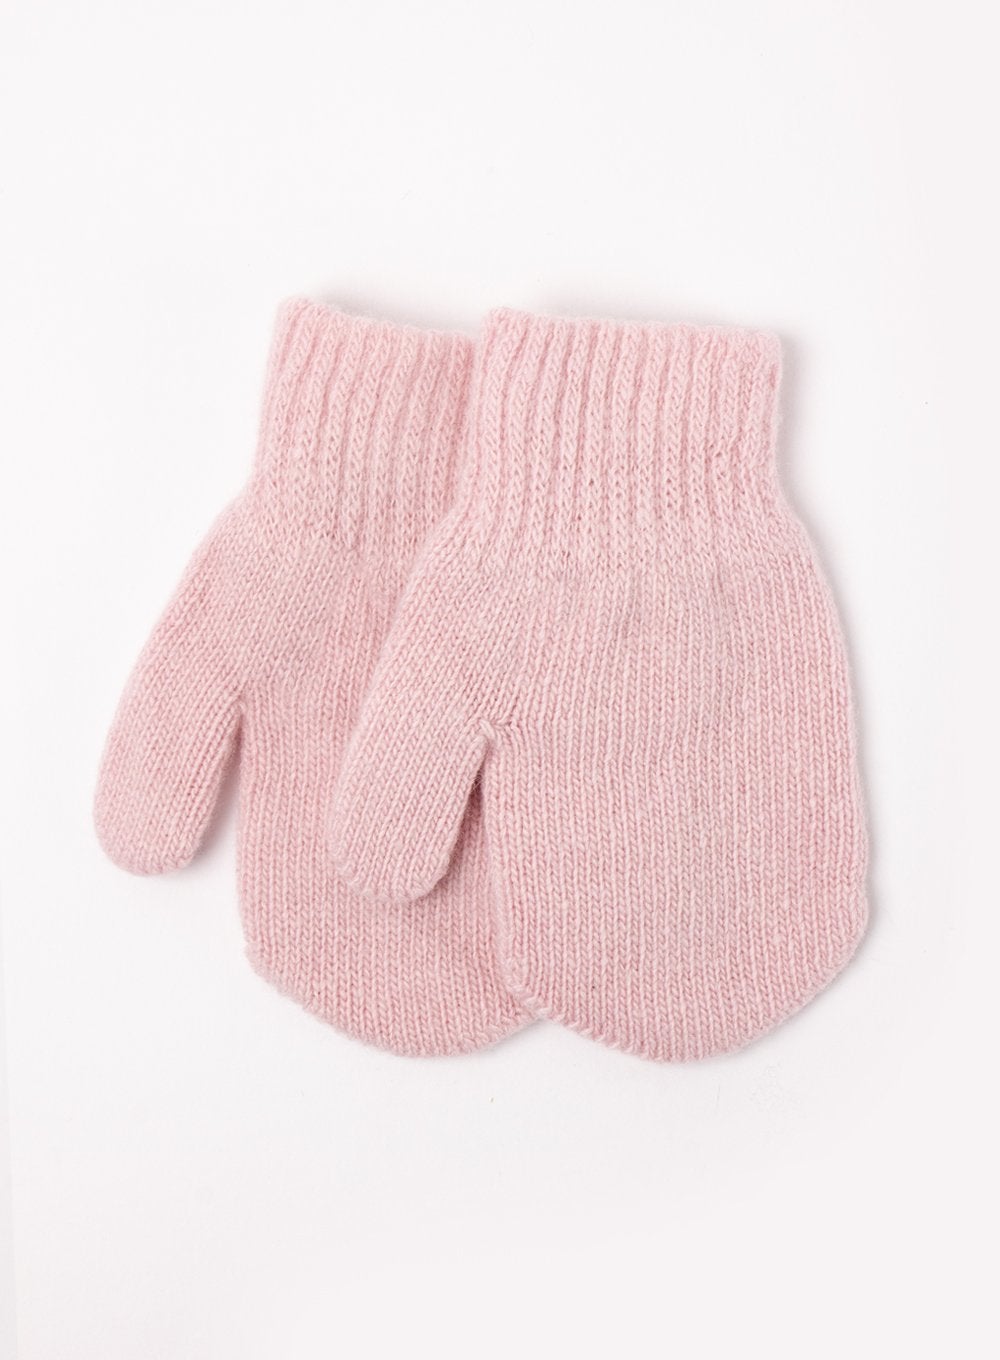 Mittens in Pink  Trotters London